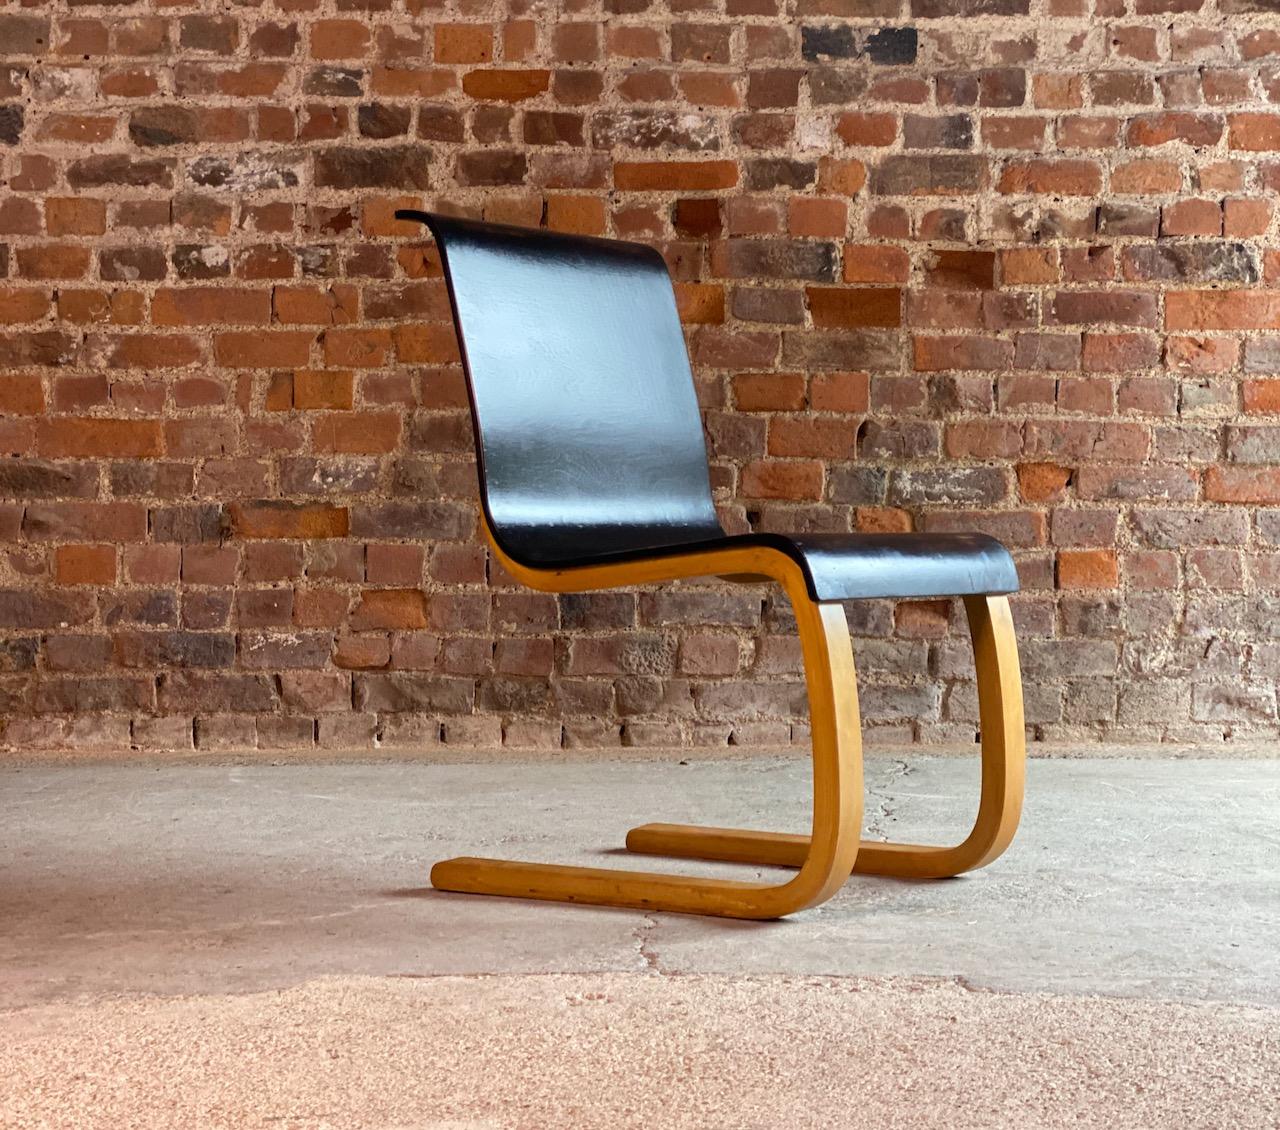 Alvar Aalto model 21 cantilever side chair by Finmar, Finland, circa 1940

Stunning original and highly sought after Alvar Aalto model 21 cantilever side chair for Finmar, Finland, circa 1934, bent laminated birch frame with moulded ebonized